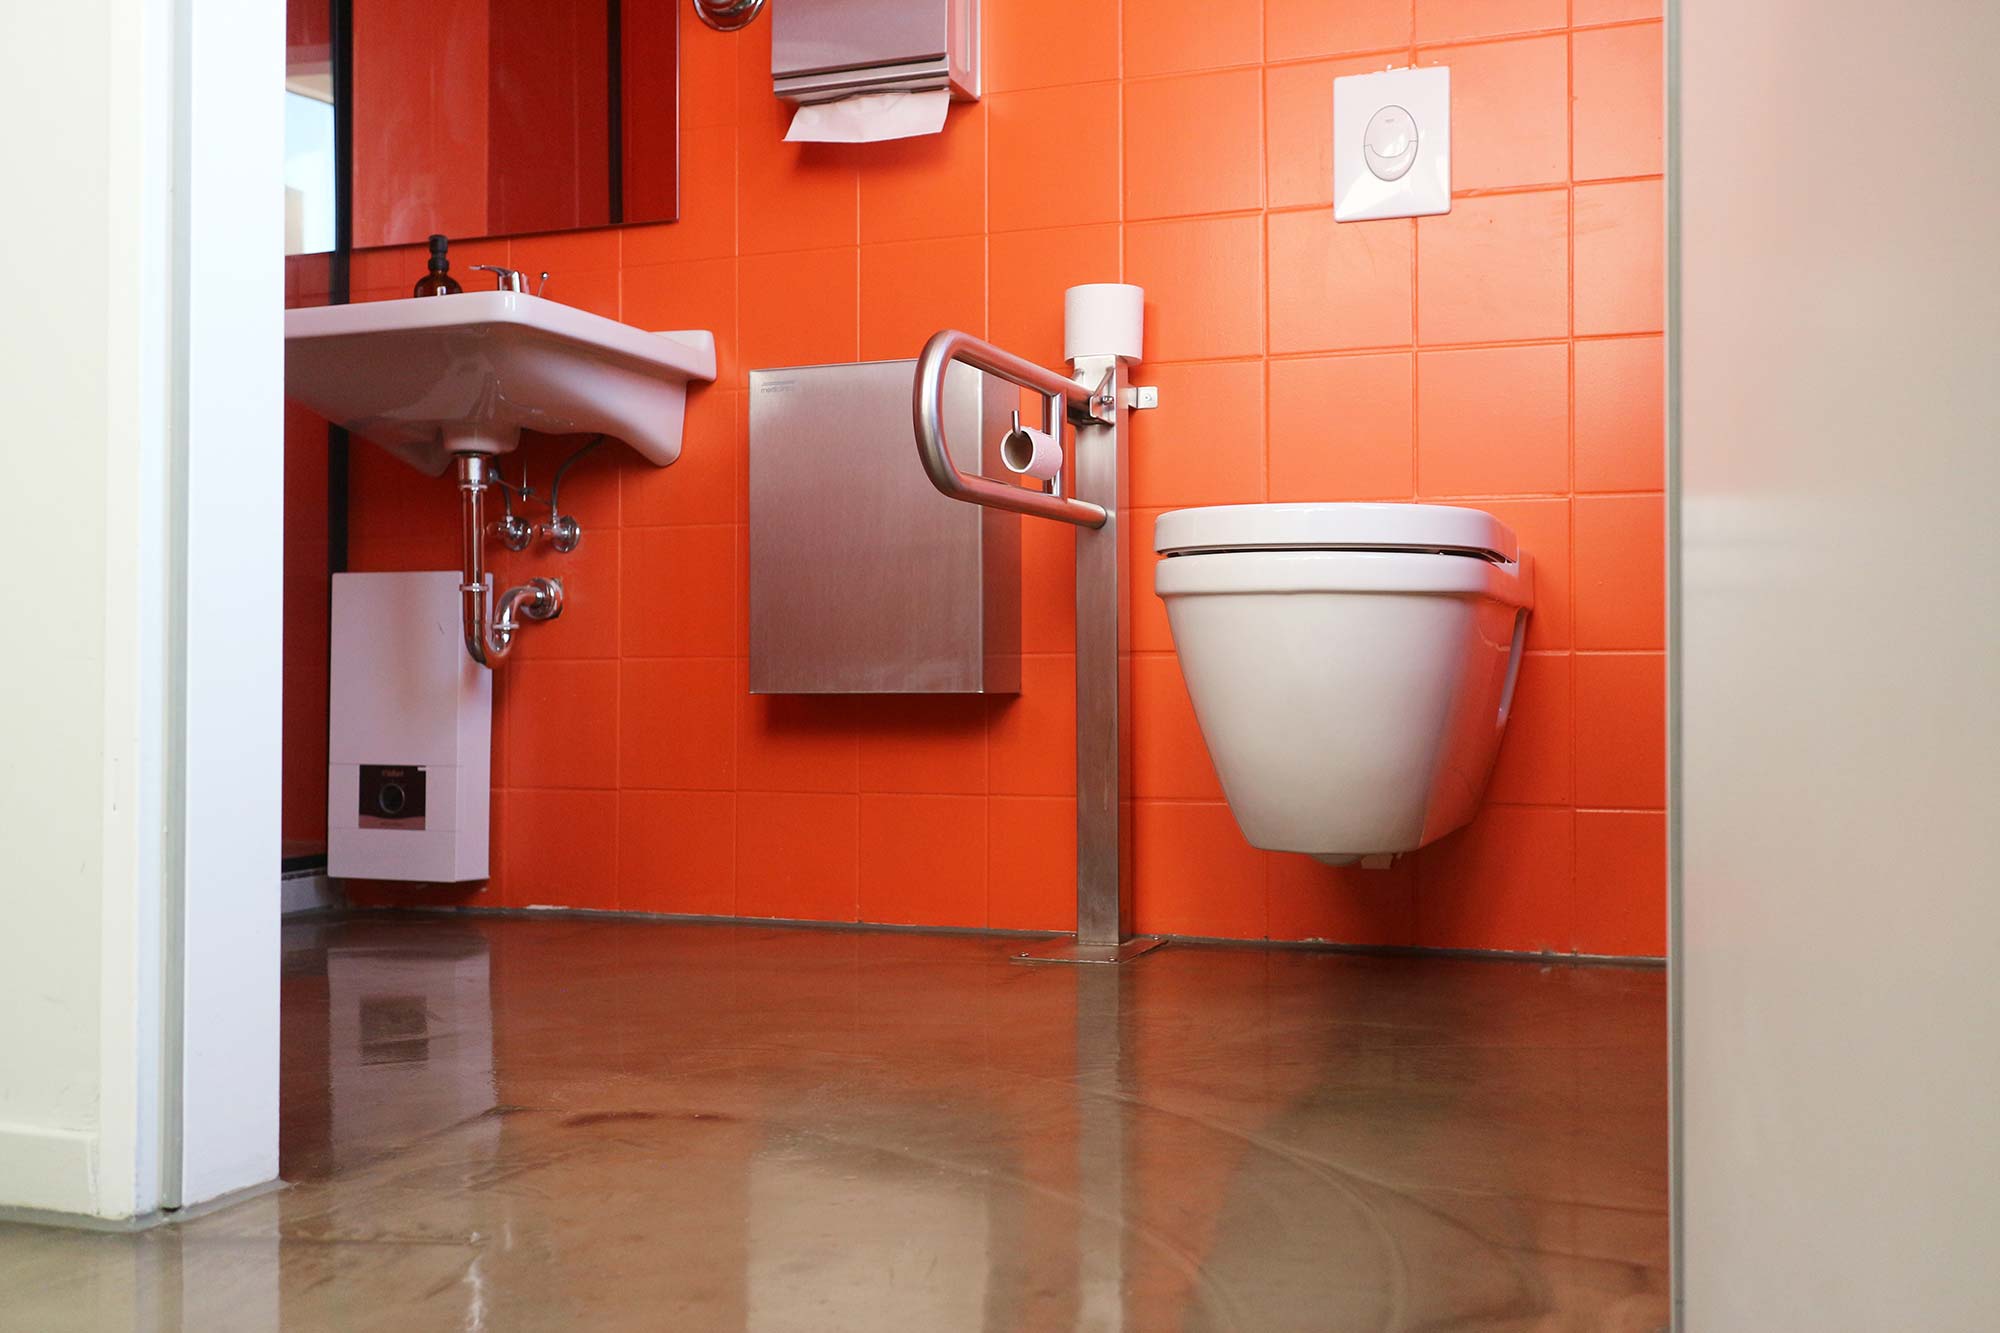 The accessible toilet is tiled with bright orange tiles; the fixtures (toilet and sink) are white, while the toilet safety rail, the wall-mounted trash can and the towel dispenser are silver; a mirror hangs above the sink